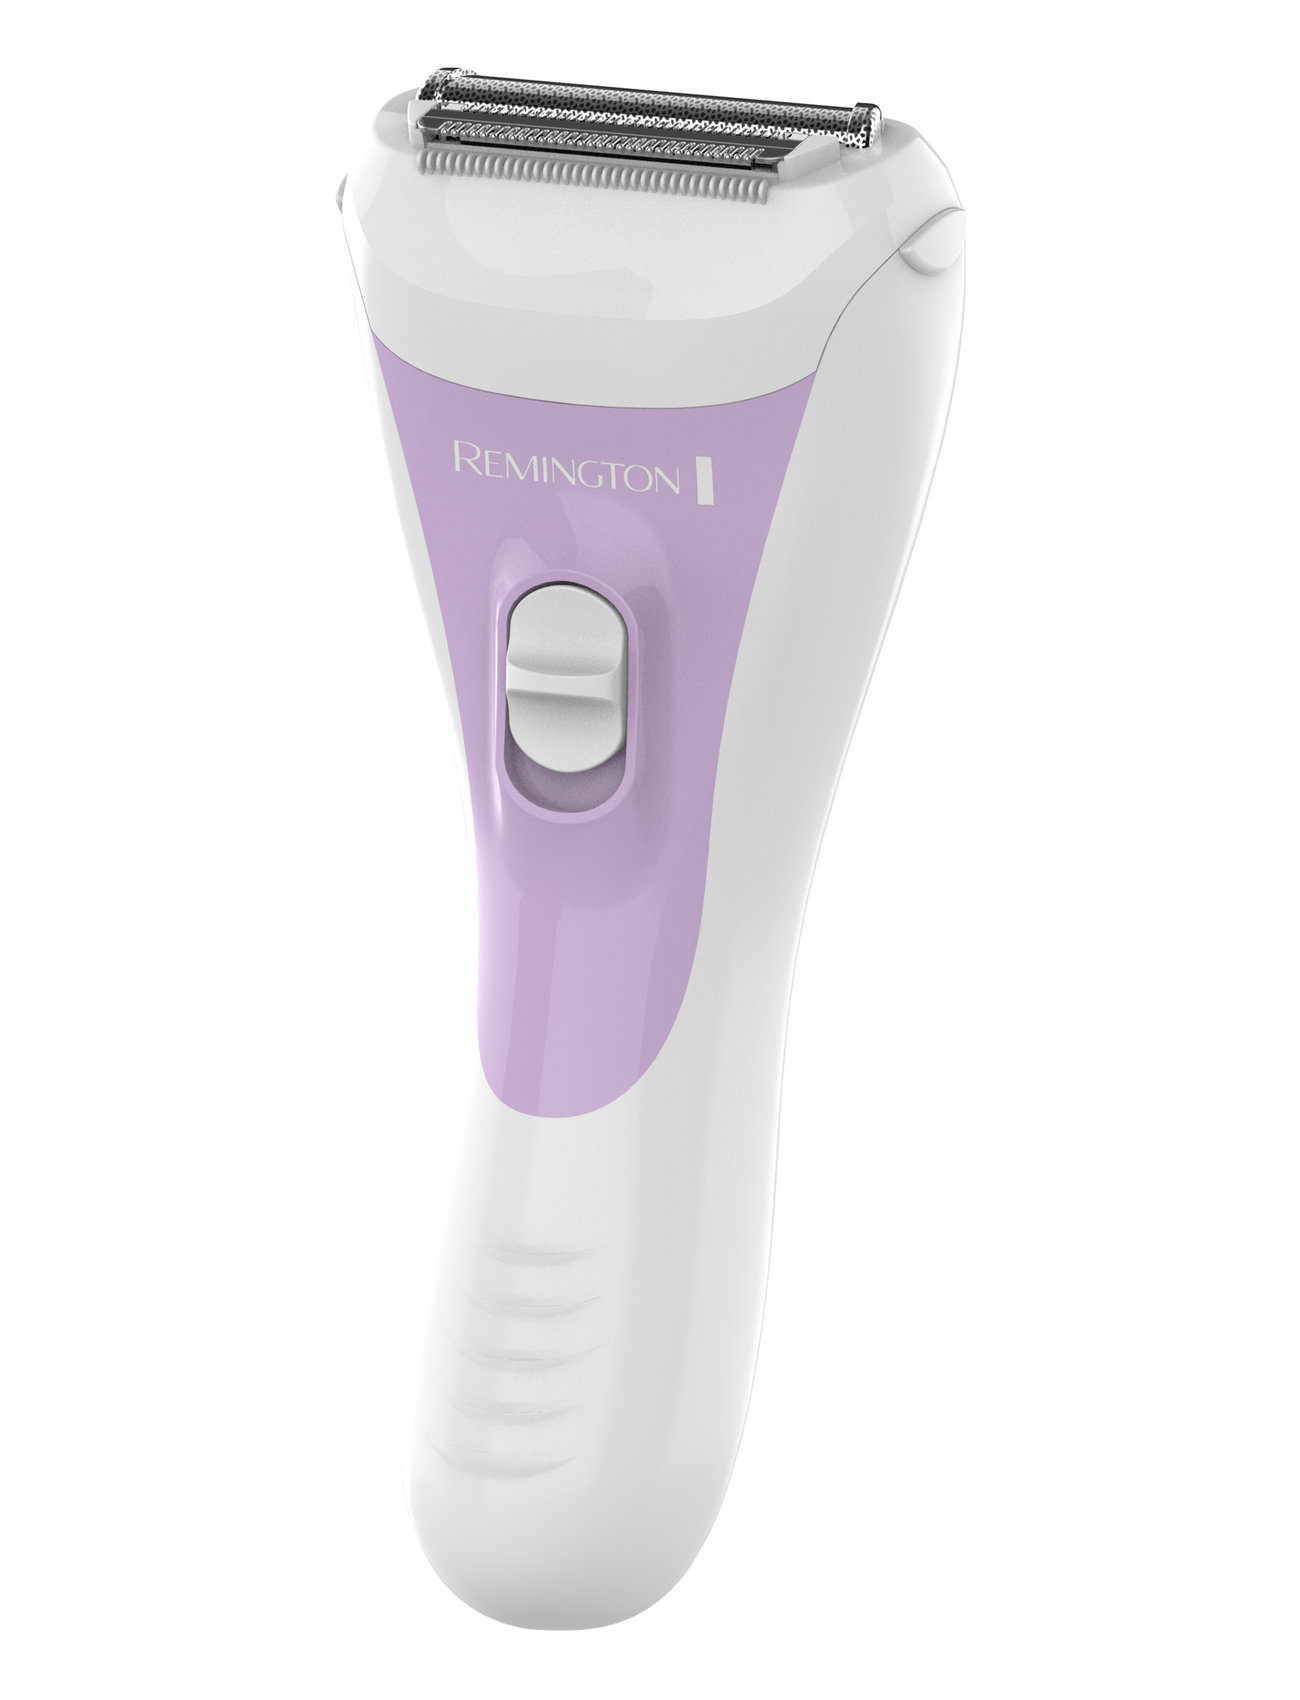 Remington "Wsf5060 Smooth & Silky Battery Operated Lady Shaver Beauty Women Skin Care Body Hair Removal Purple Remington"